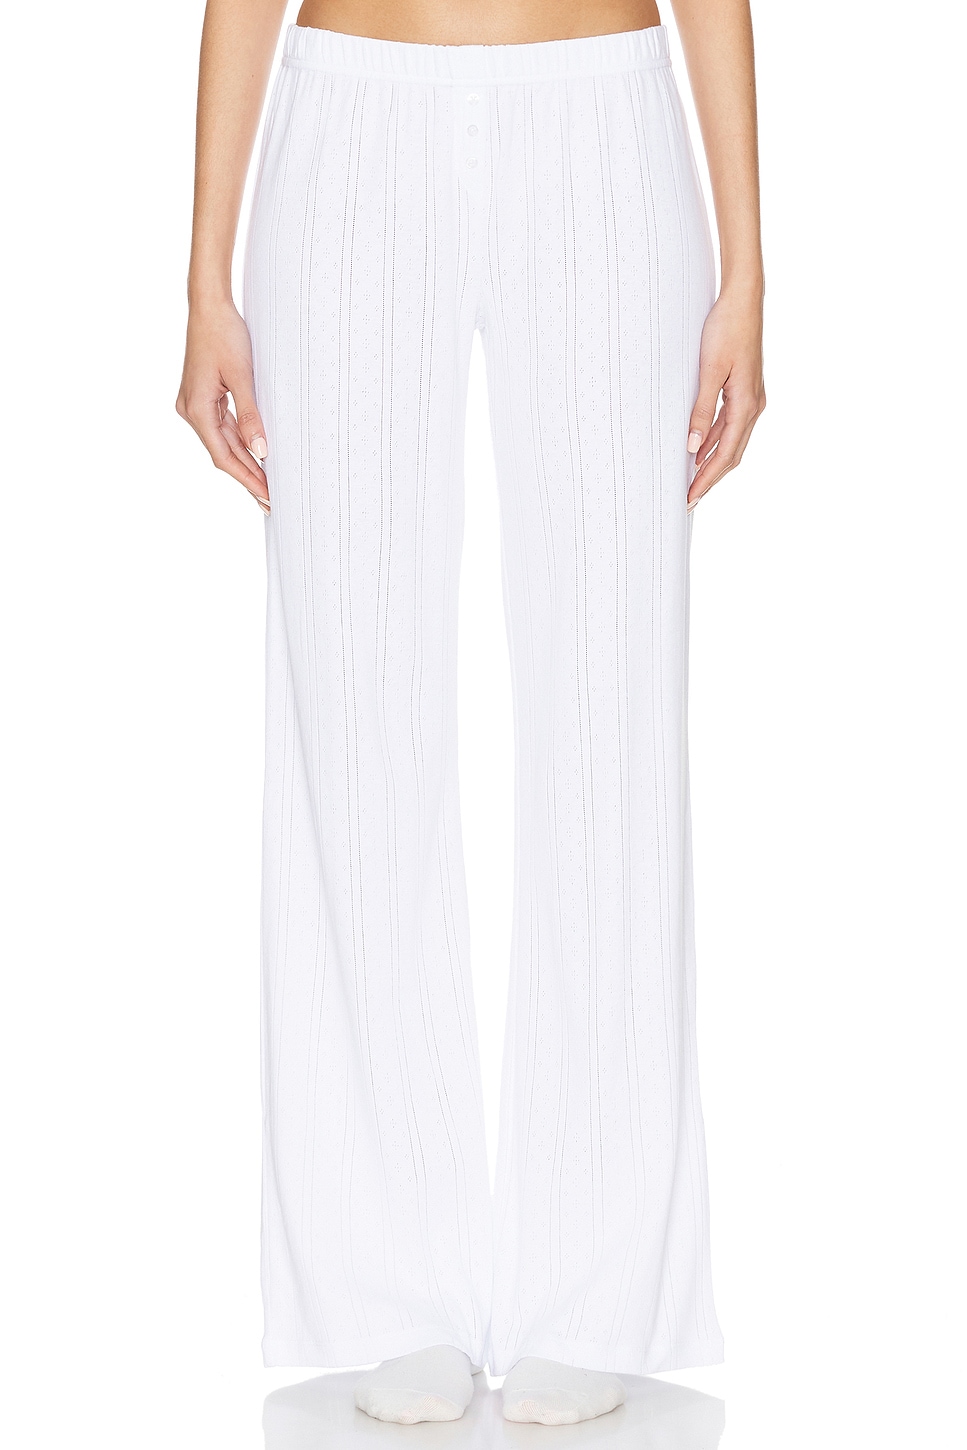 Image 1 of Cou Cou Intimates The Pant in White